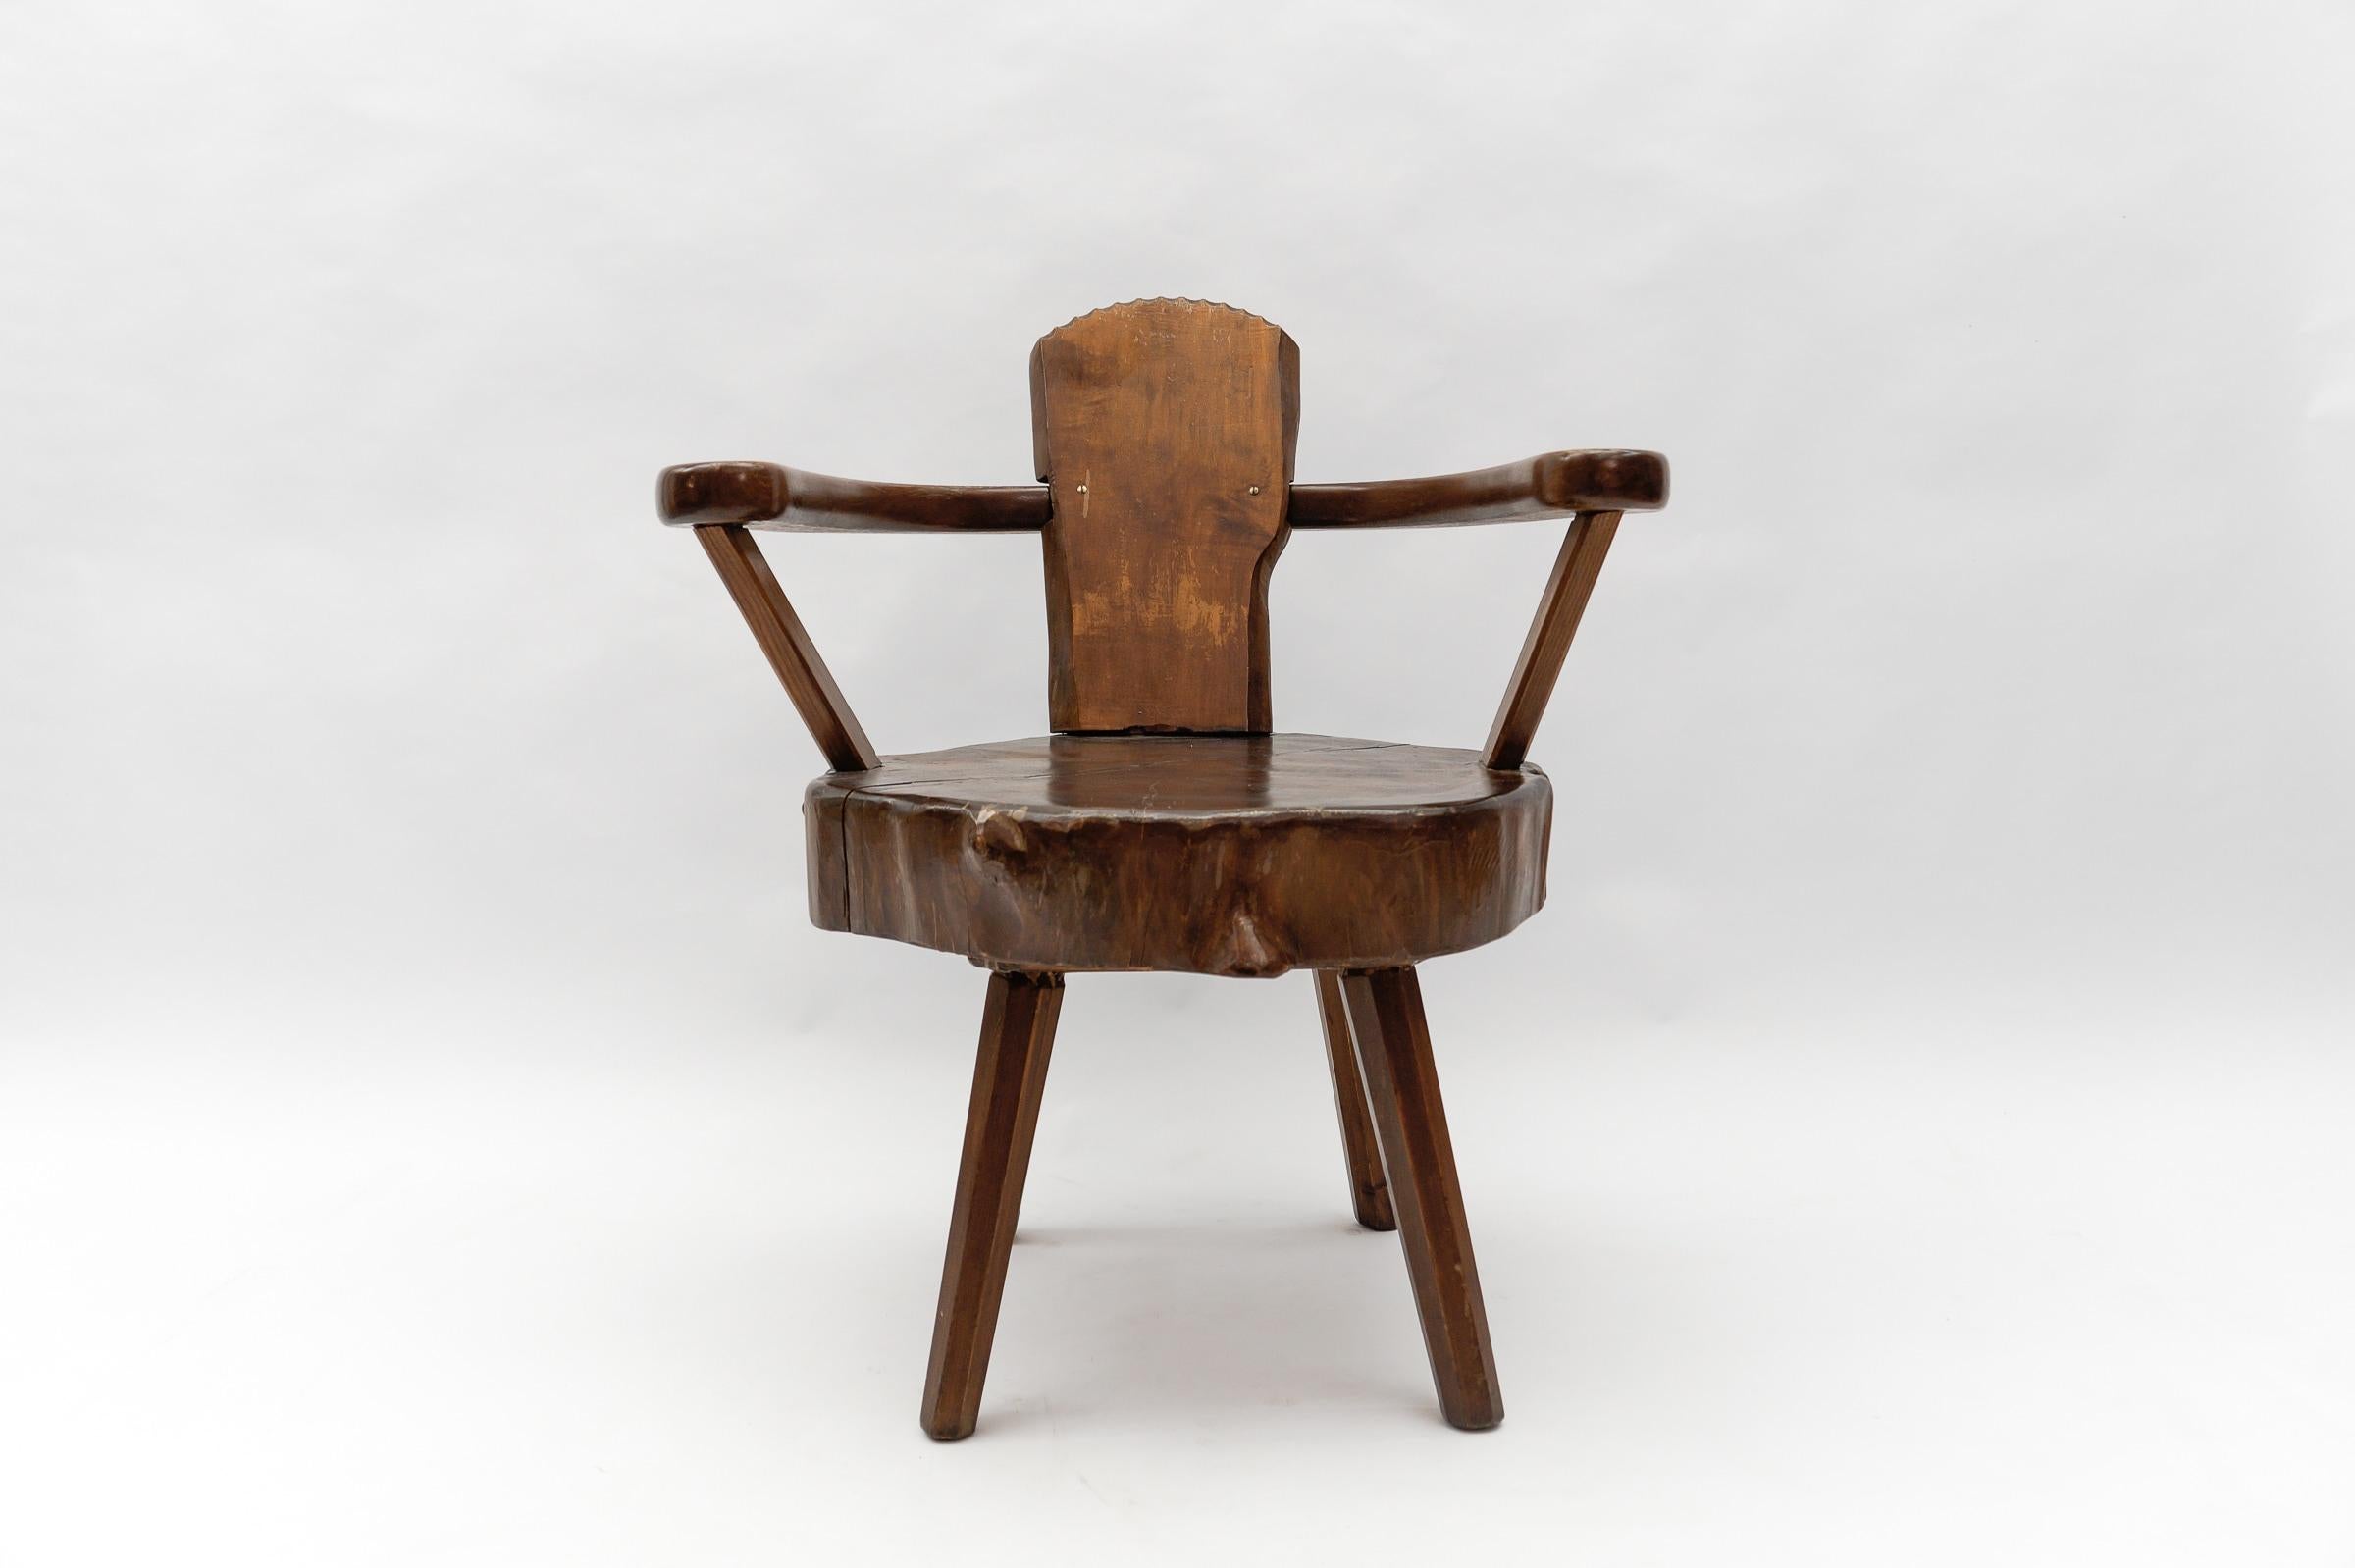 A total of four are available and are offered for sale here on the platform. 

Dark stained. Cool optic. Handmade imposing wooden armchair. Each armchair is unique.

This armchair here has a seat height of 42.5cm. The tree trunk thickness is